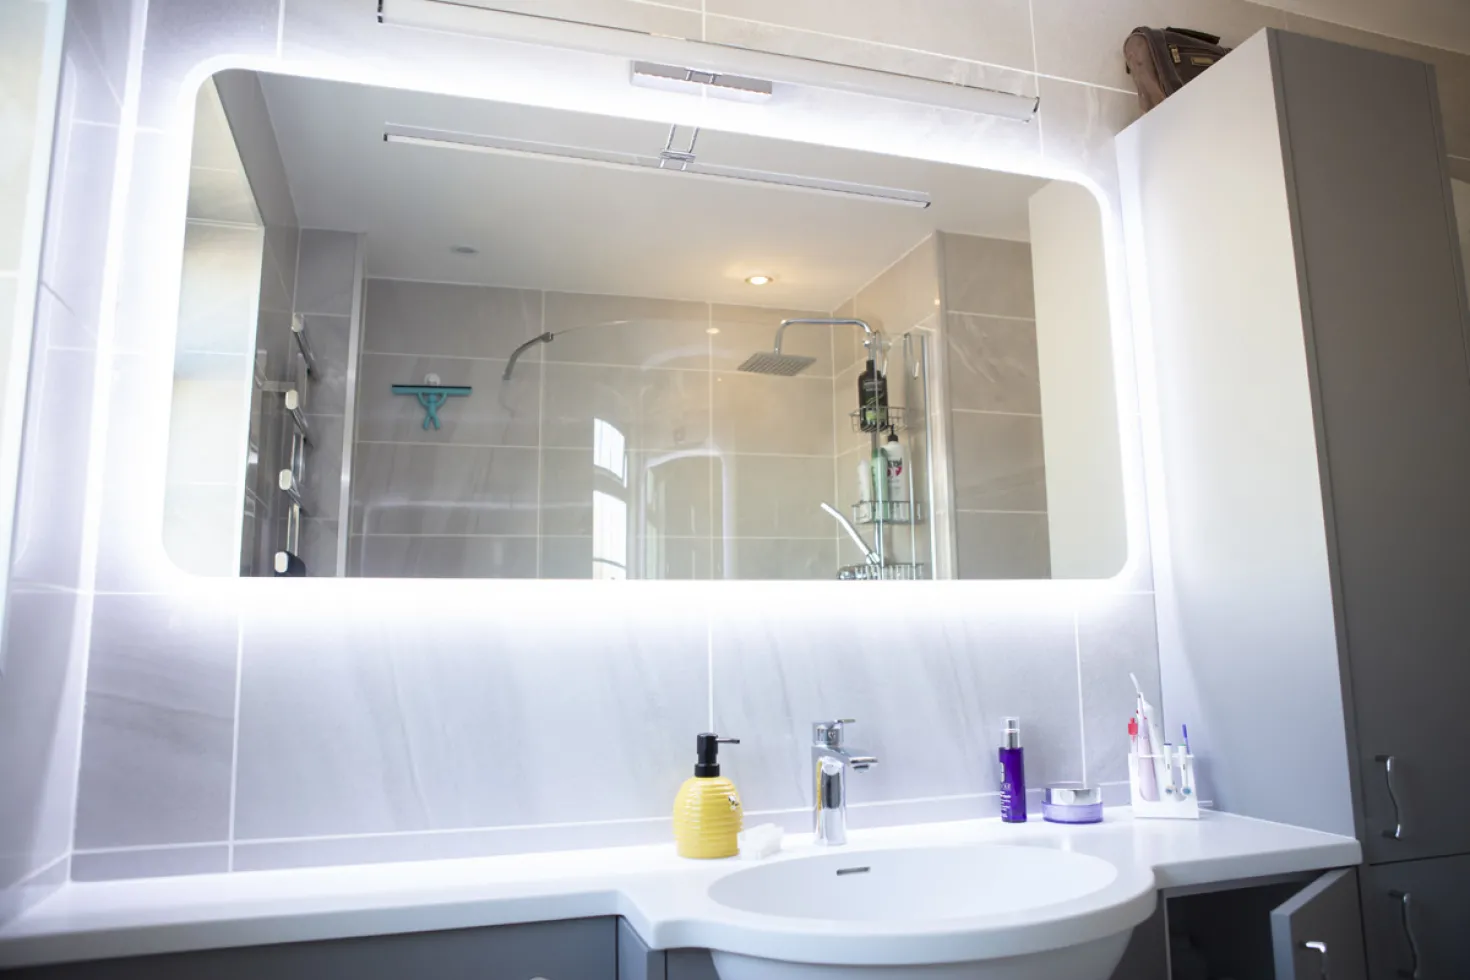 All About The Curves Bathroom Renovation image